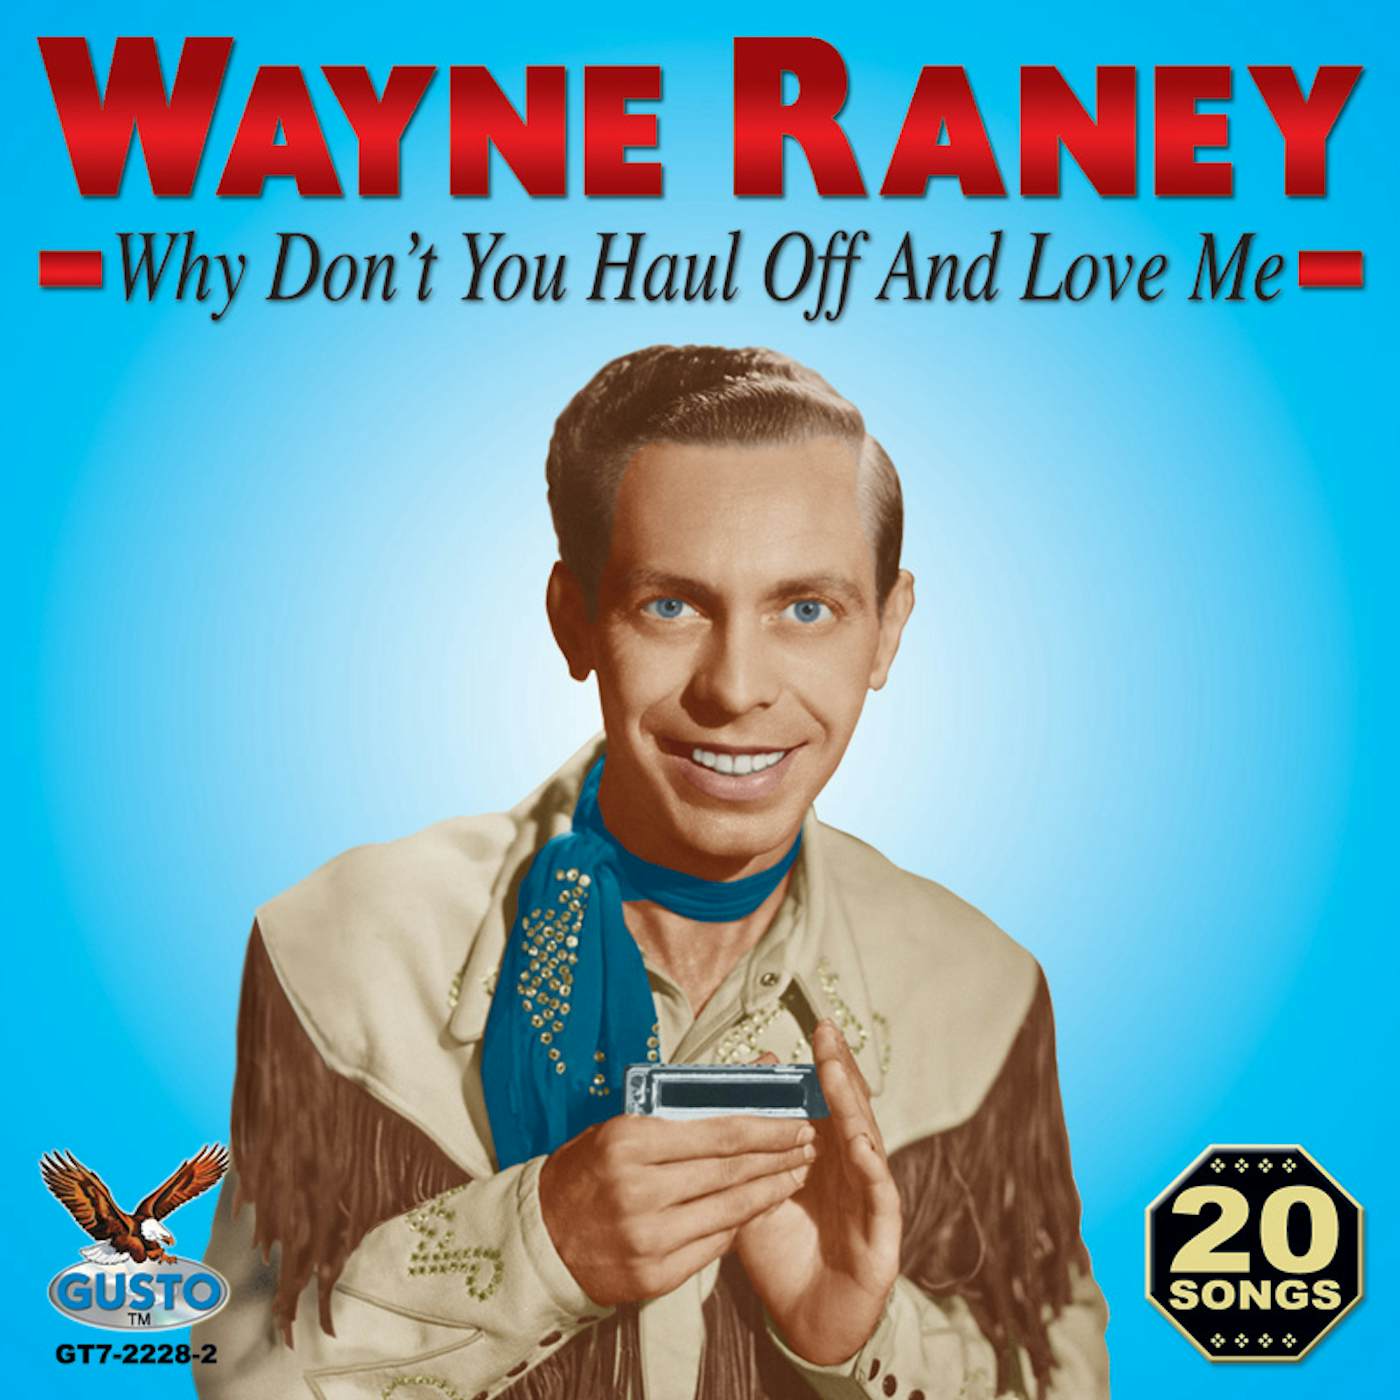 Wayne Raney WHY DON'T YOU HAUL OFF & LOVE ME CD